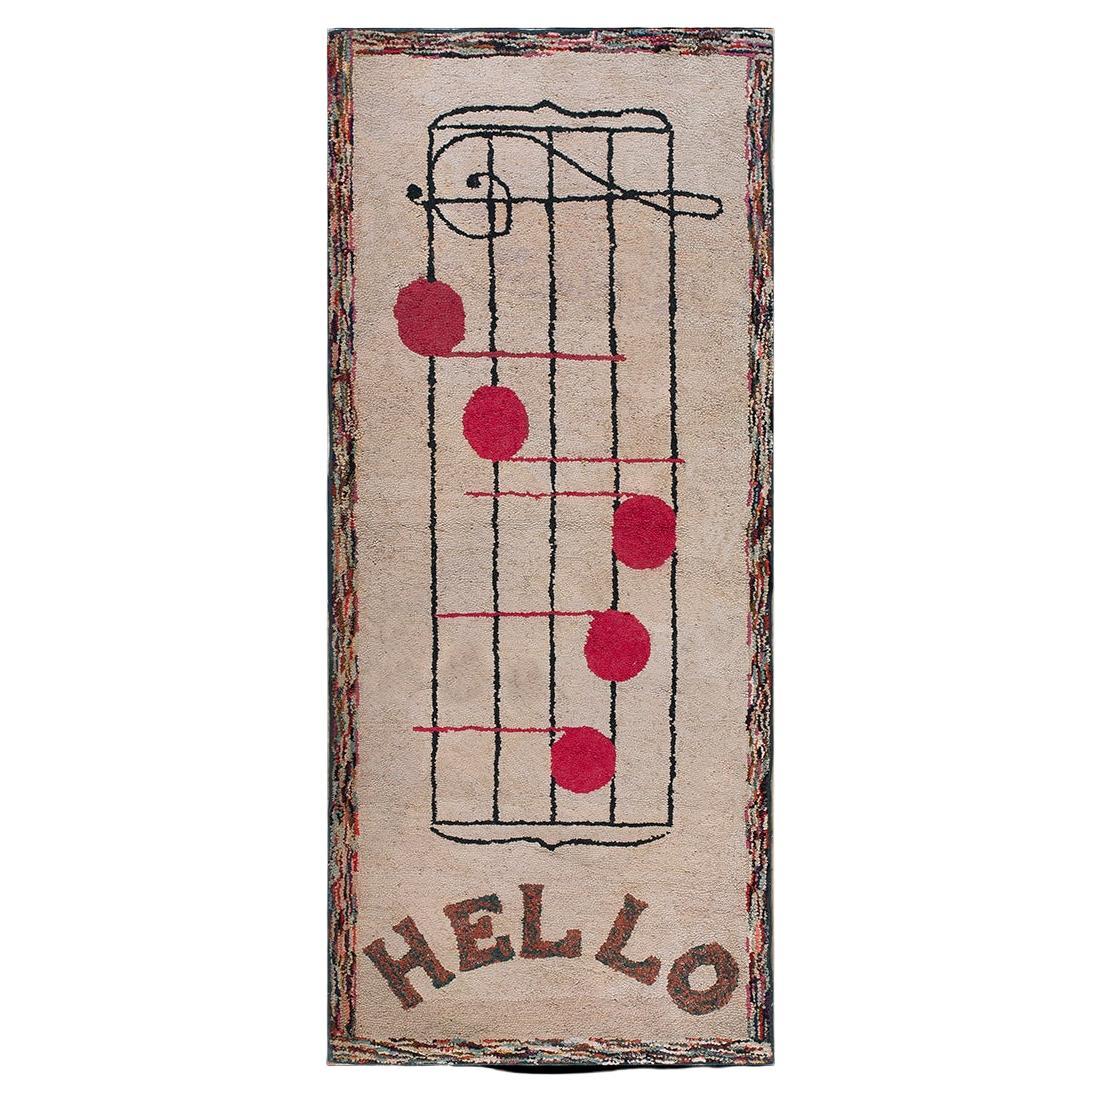 Early 20th Century American Hooked Rug  ( 3' x 7'5" - 91 x 226 )